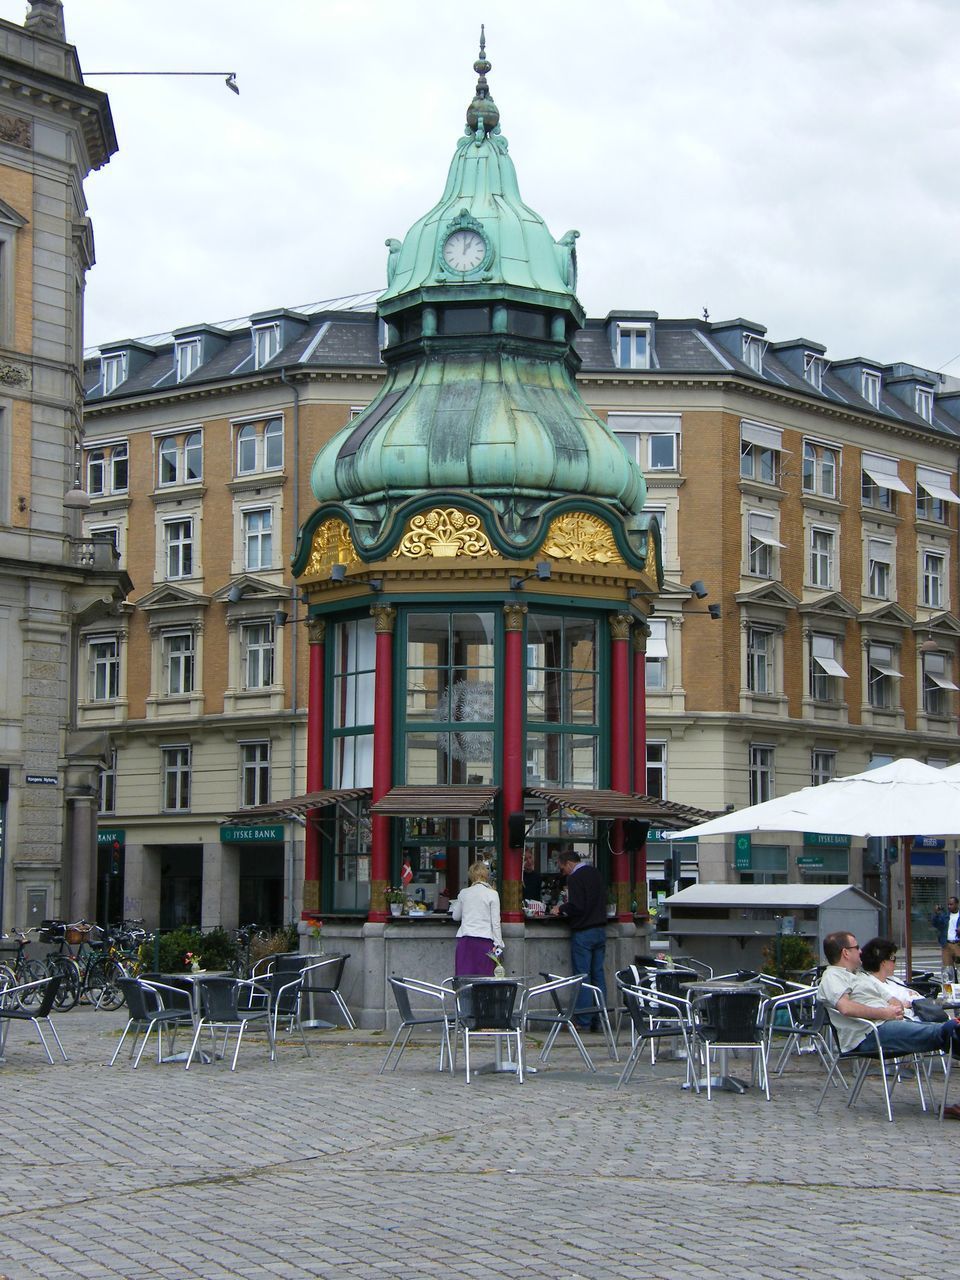 CHAIRS AND TABLE AT SIDEWALK CAFE AGAINST BUILDINGS